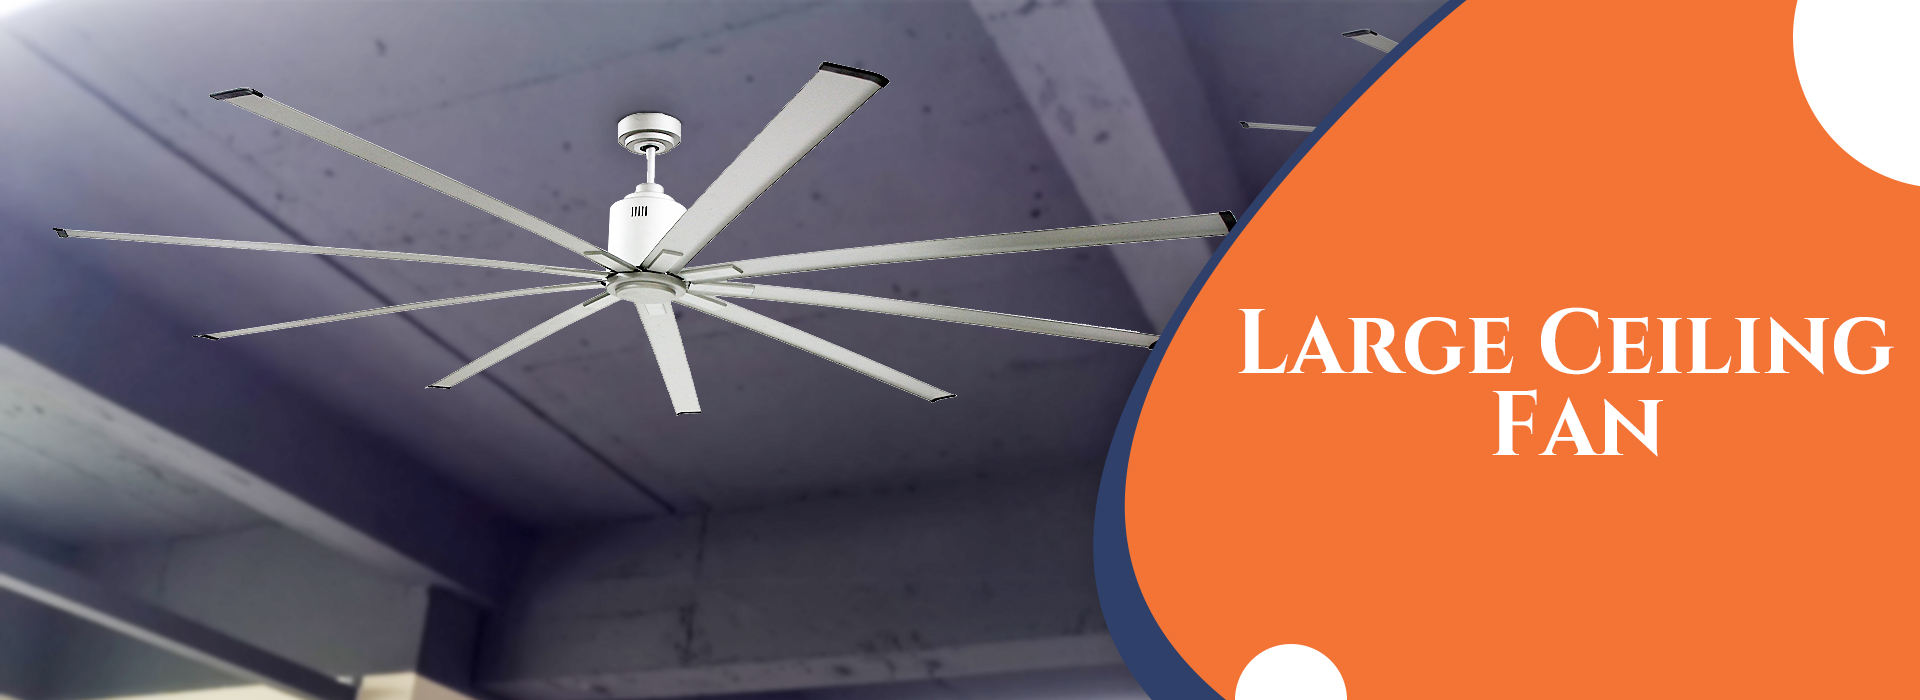 Large Ceiling Fan In Connaught Place